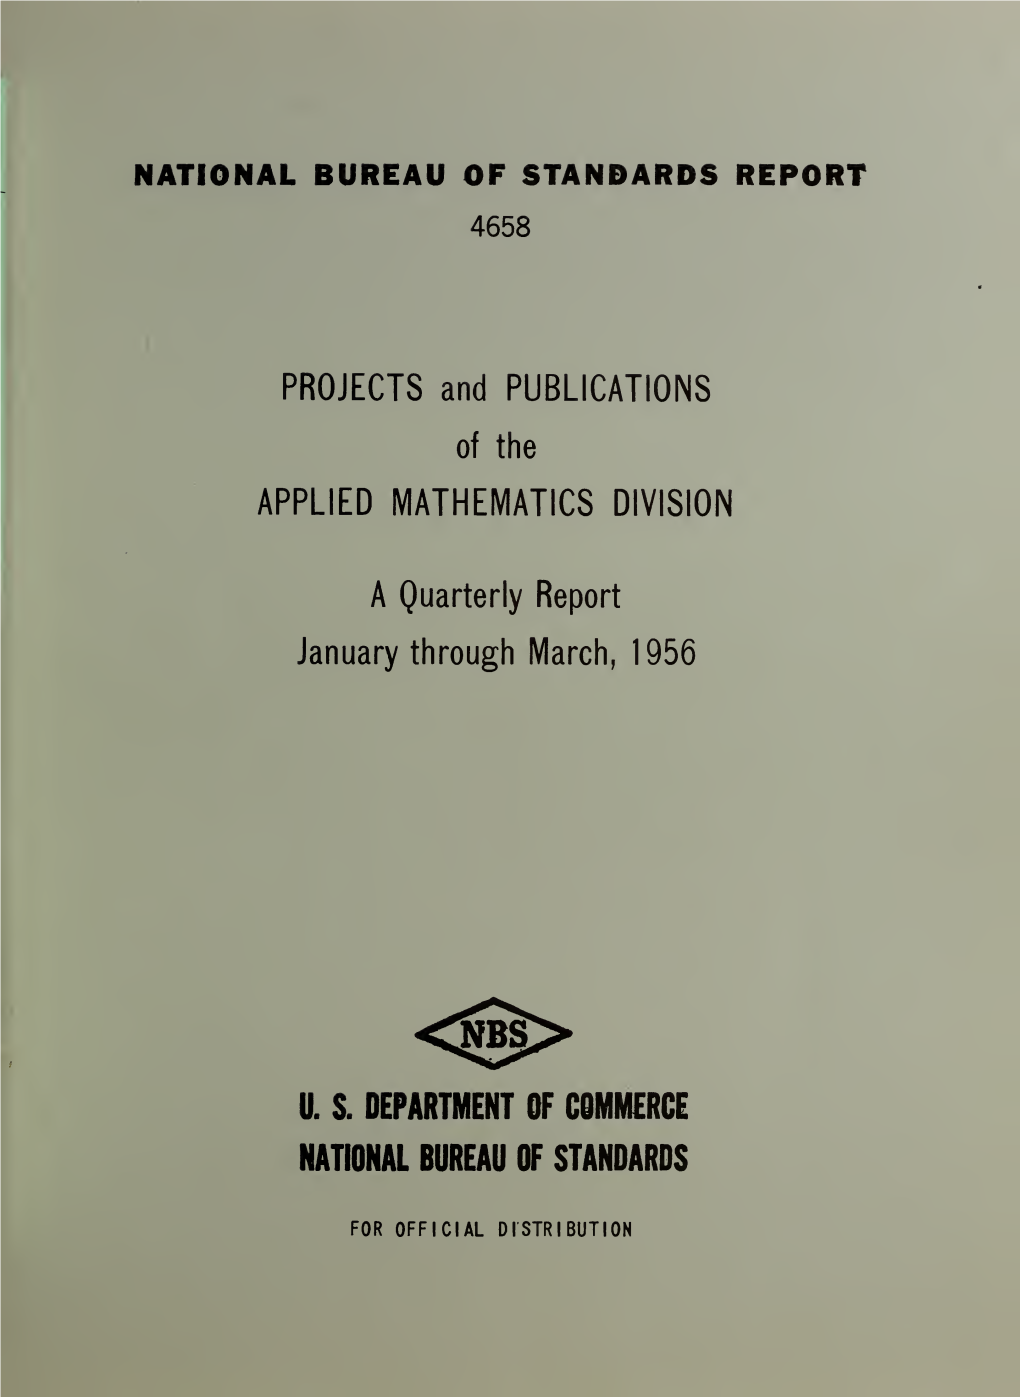 Projects and Publications of the Applied Mathematics Division